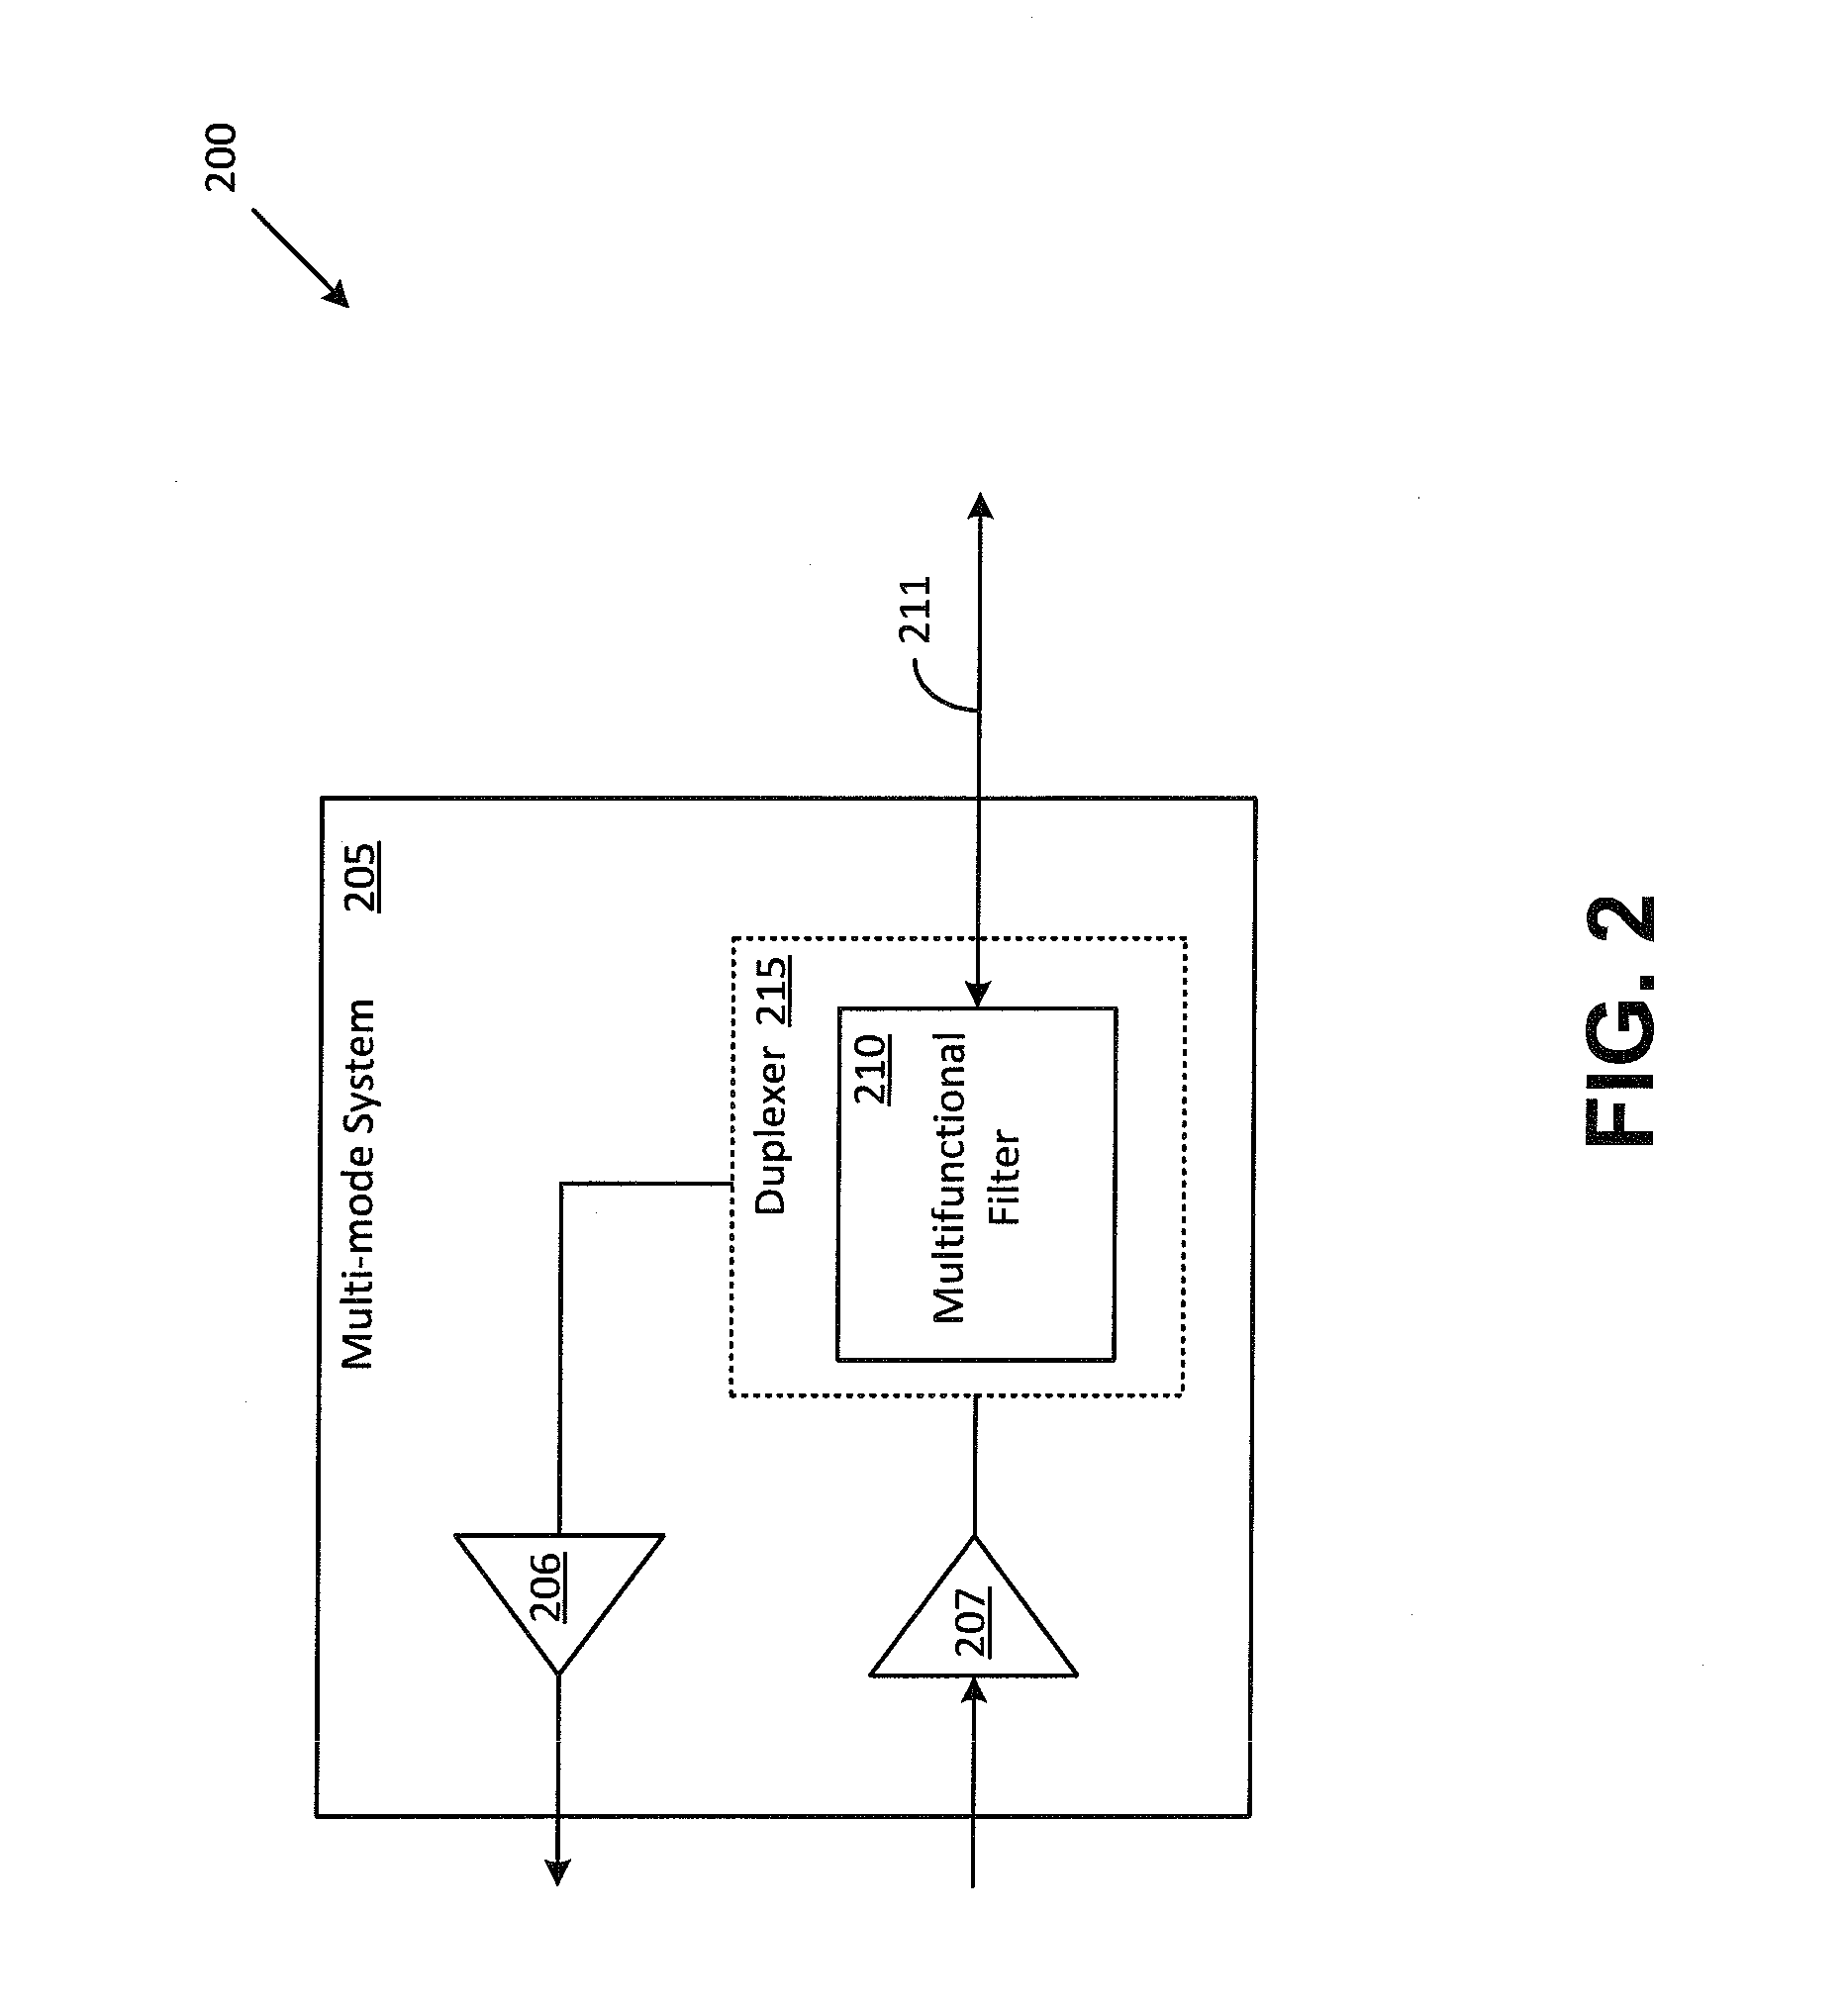 Systems and Methods for Minimizing Insertion Loss in a Multi-Mode Communications System